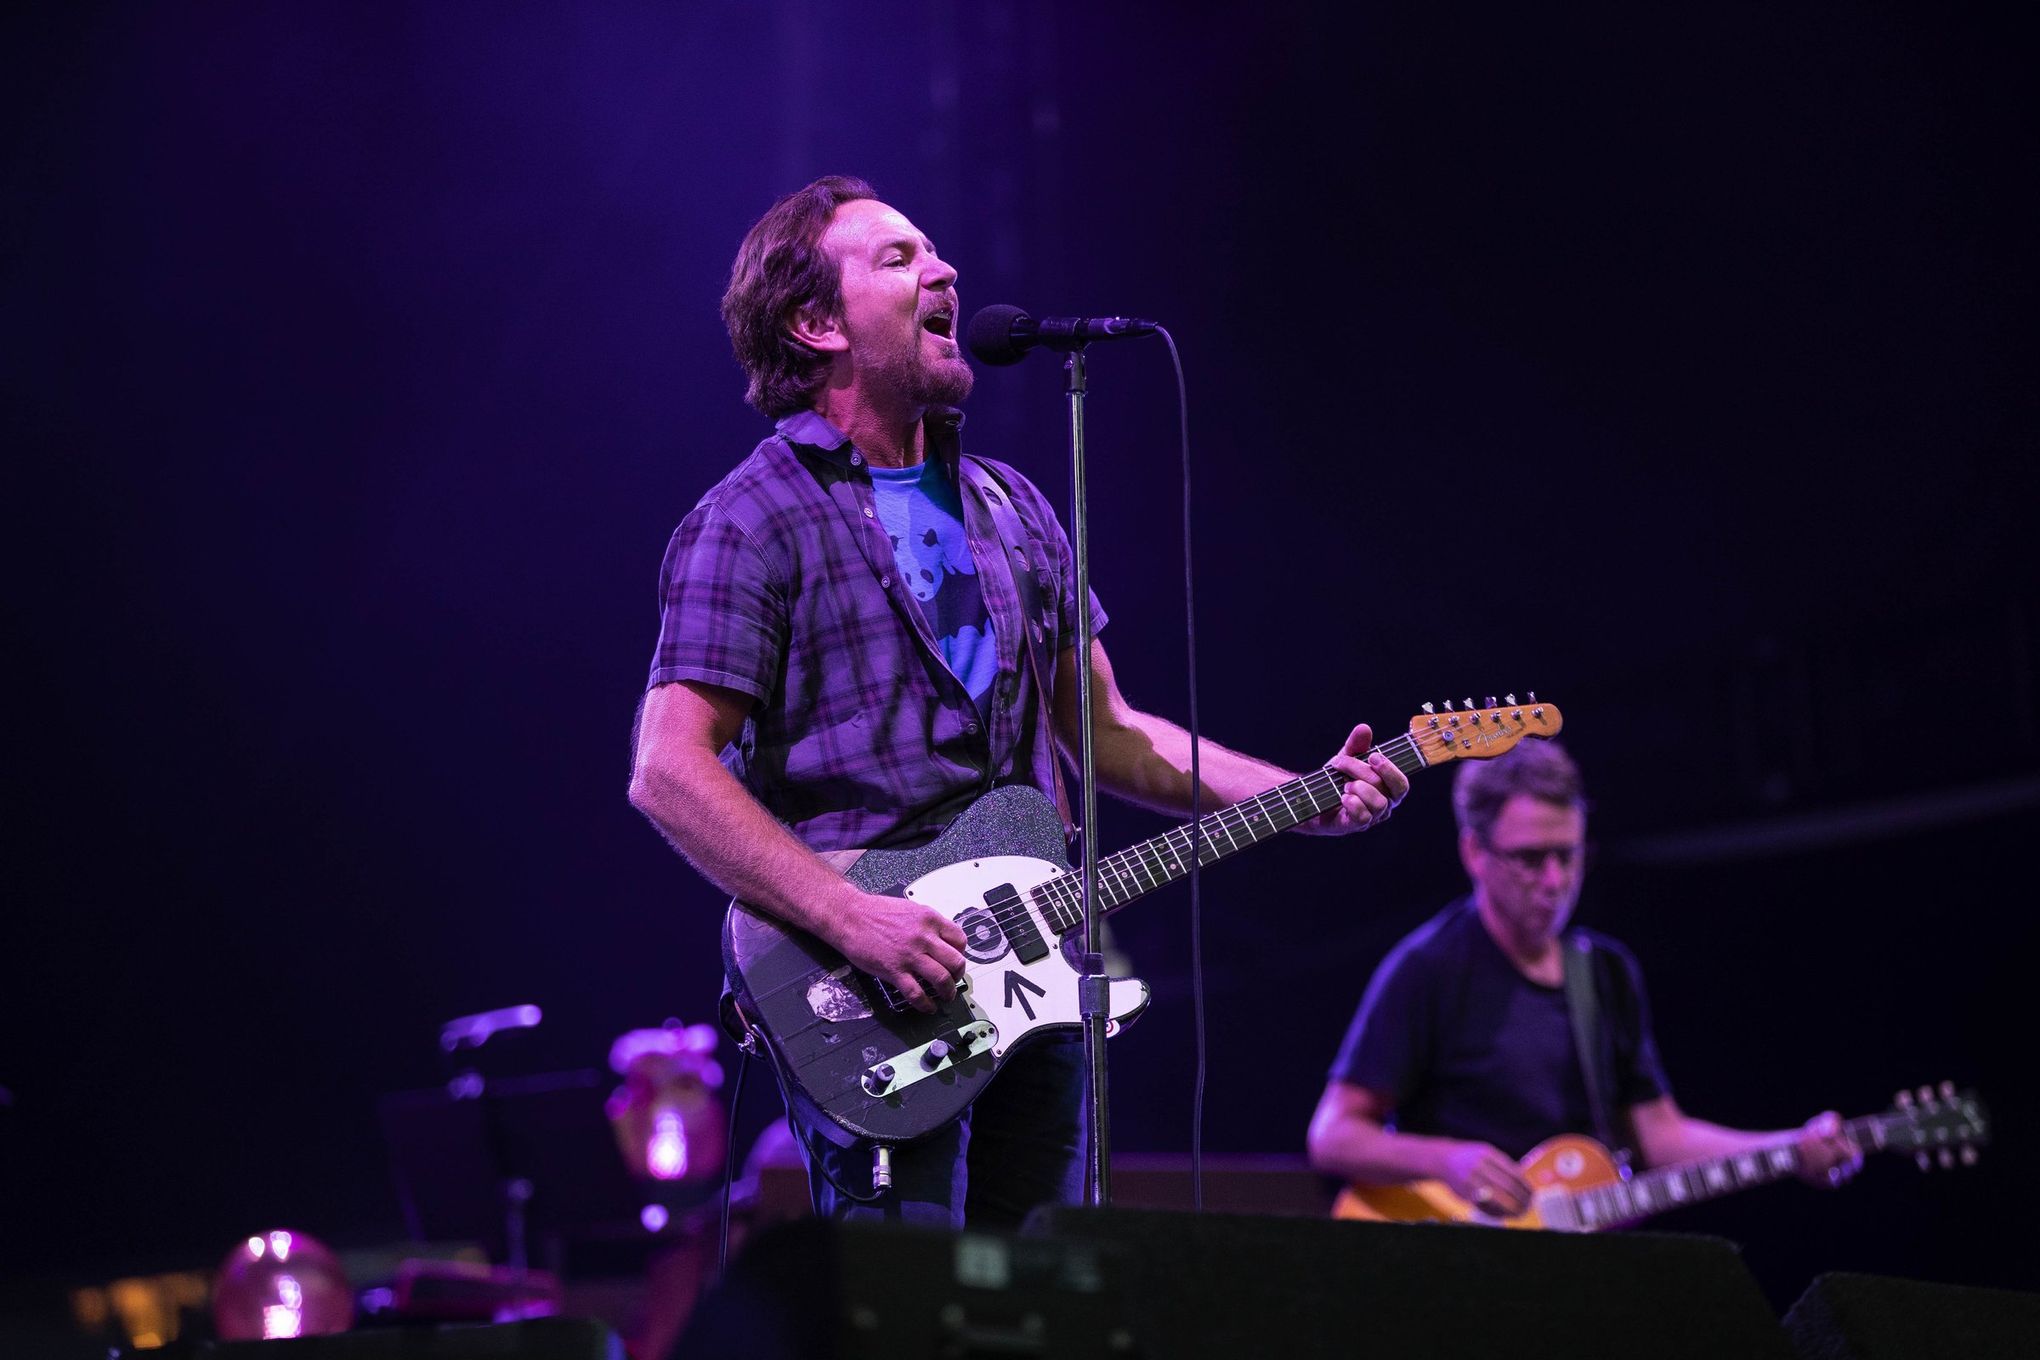 Future grunge-rock icons of Pearl Jam perform debut gig as Mookie